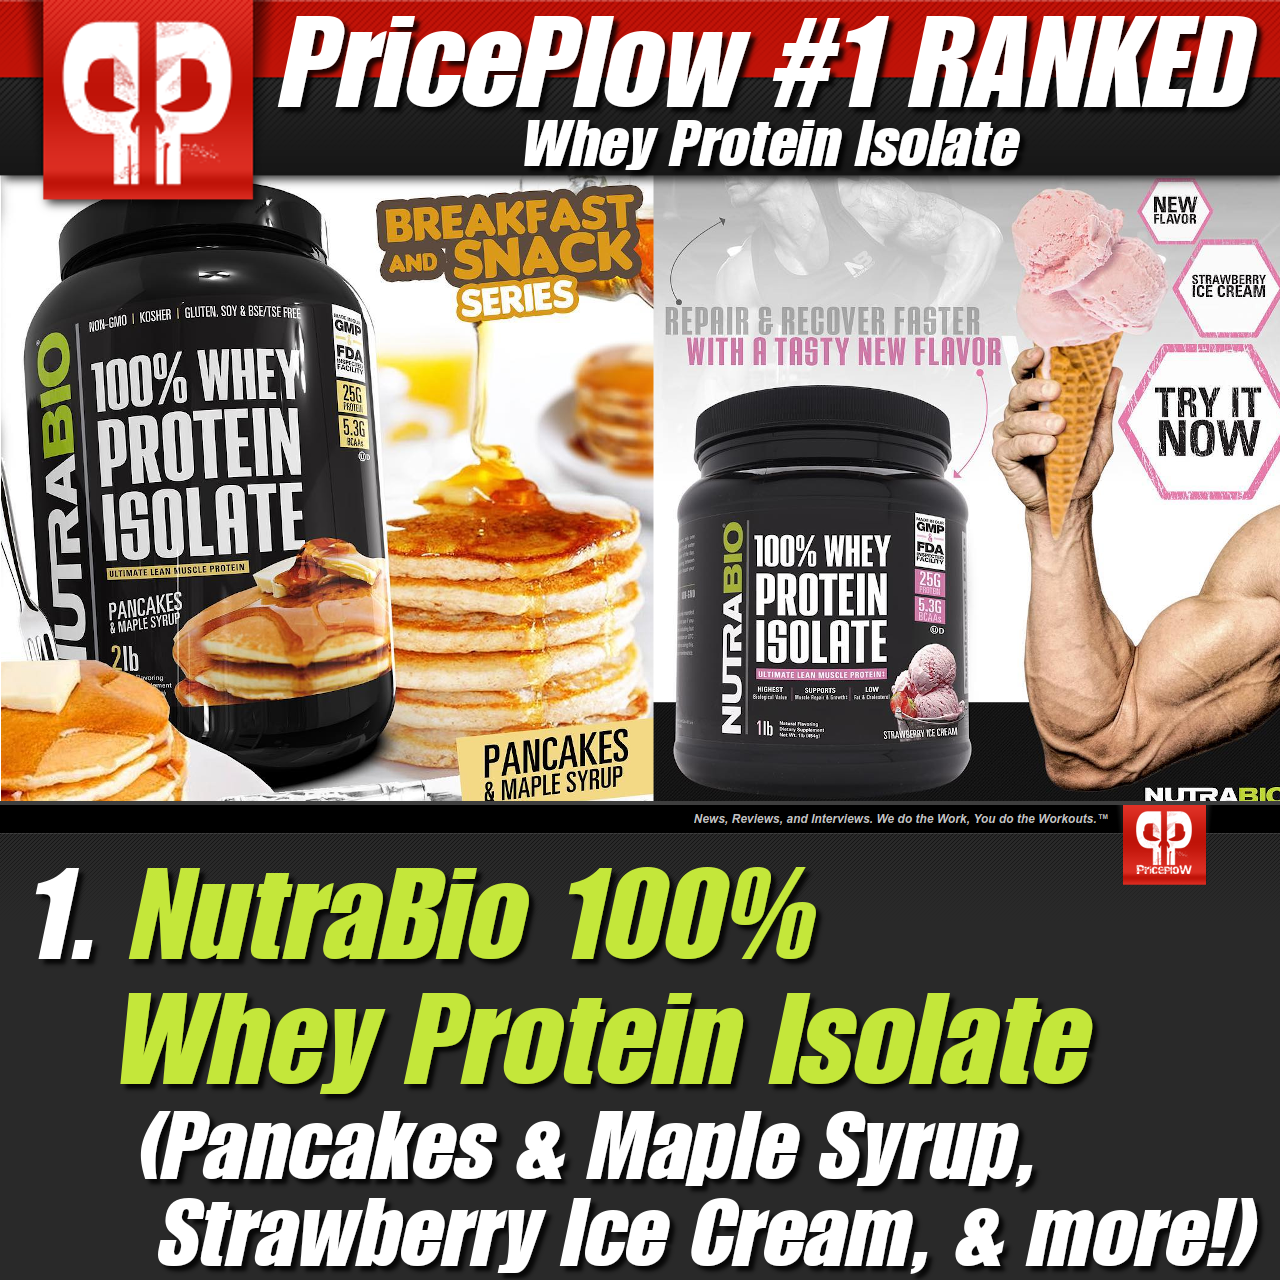 Best Whey Protein Isolate